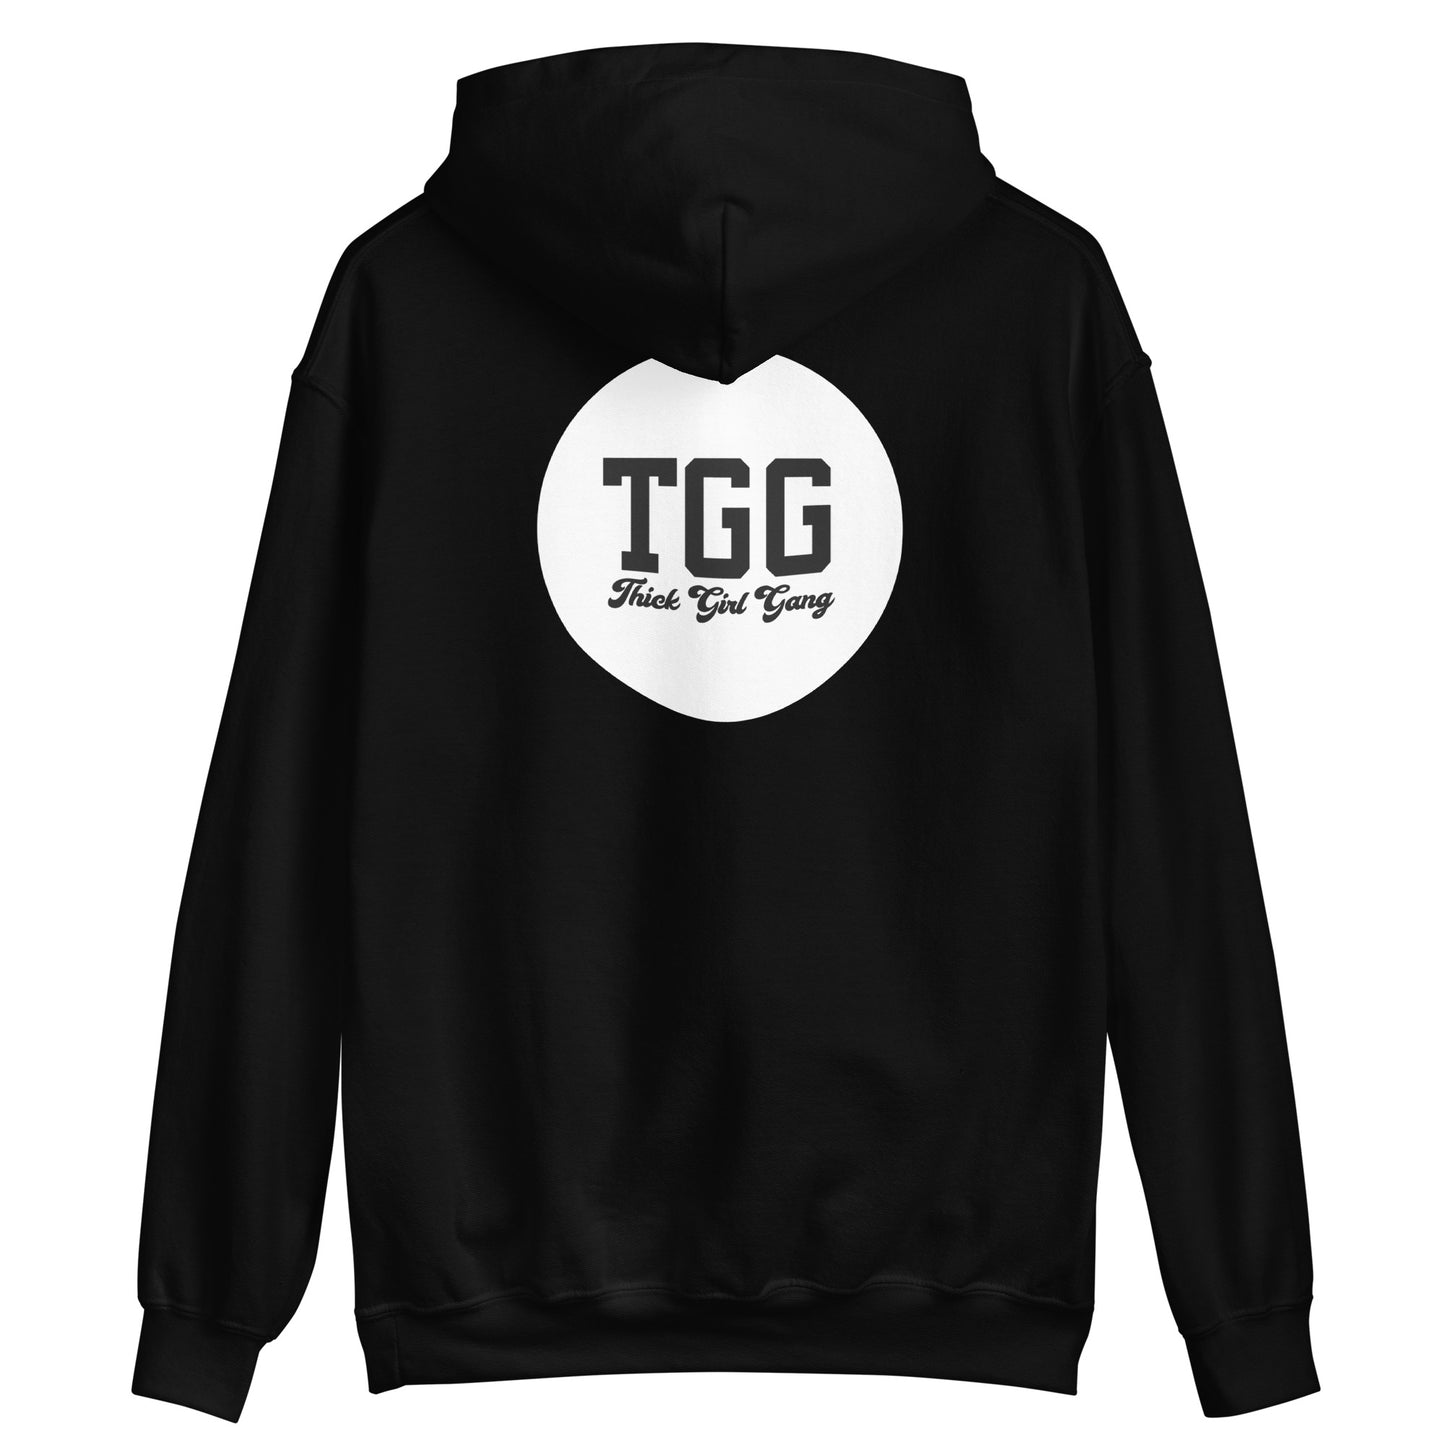 The THICK Girl Gang Plain Not White Hoodie